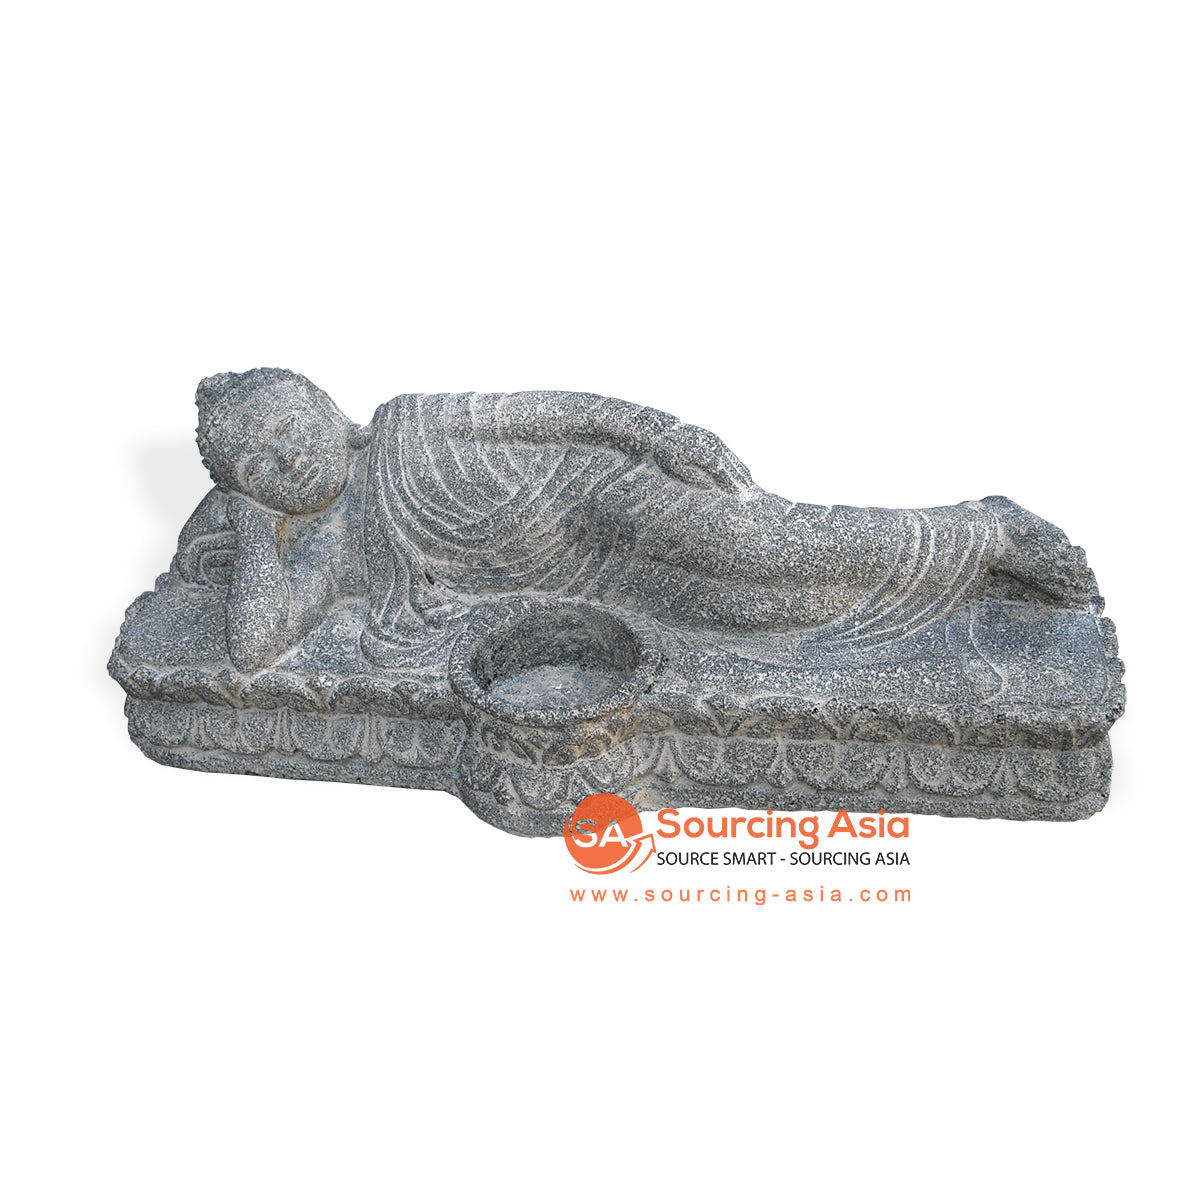 MHB090 STONE BUDDHA STATUE WITH CANDLE HOLDER